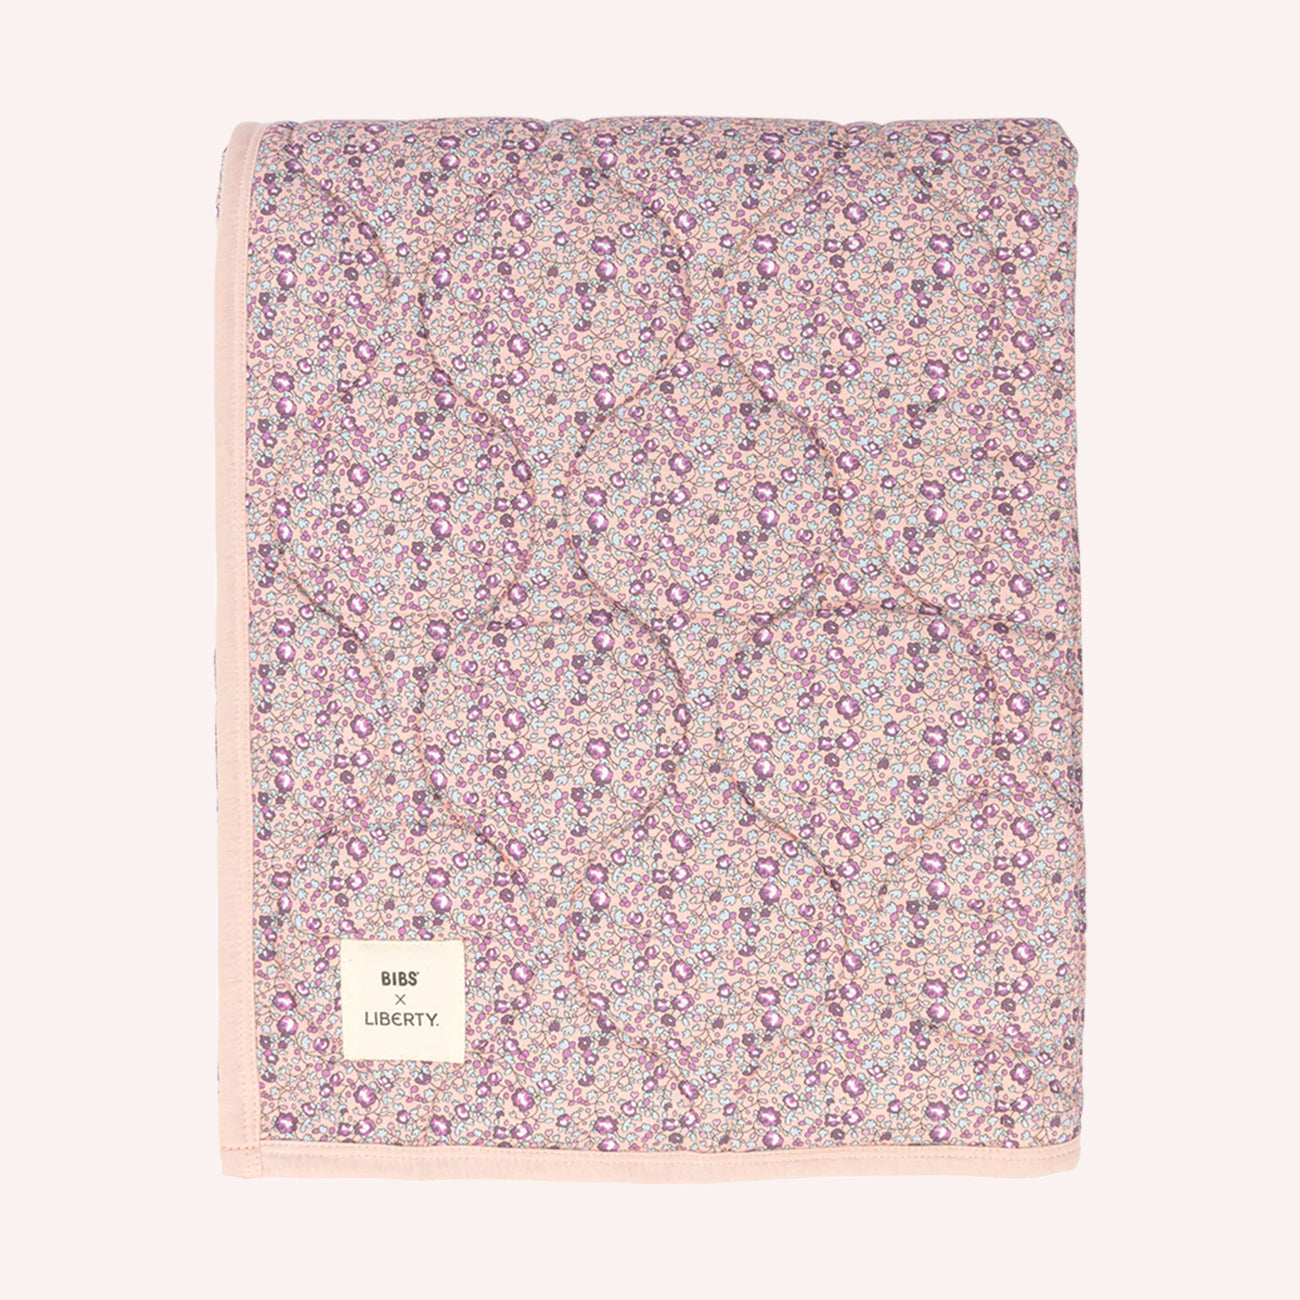 BIBS x Liberty Quilted Blanket - Eloise Blush